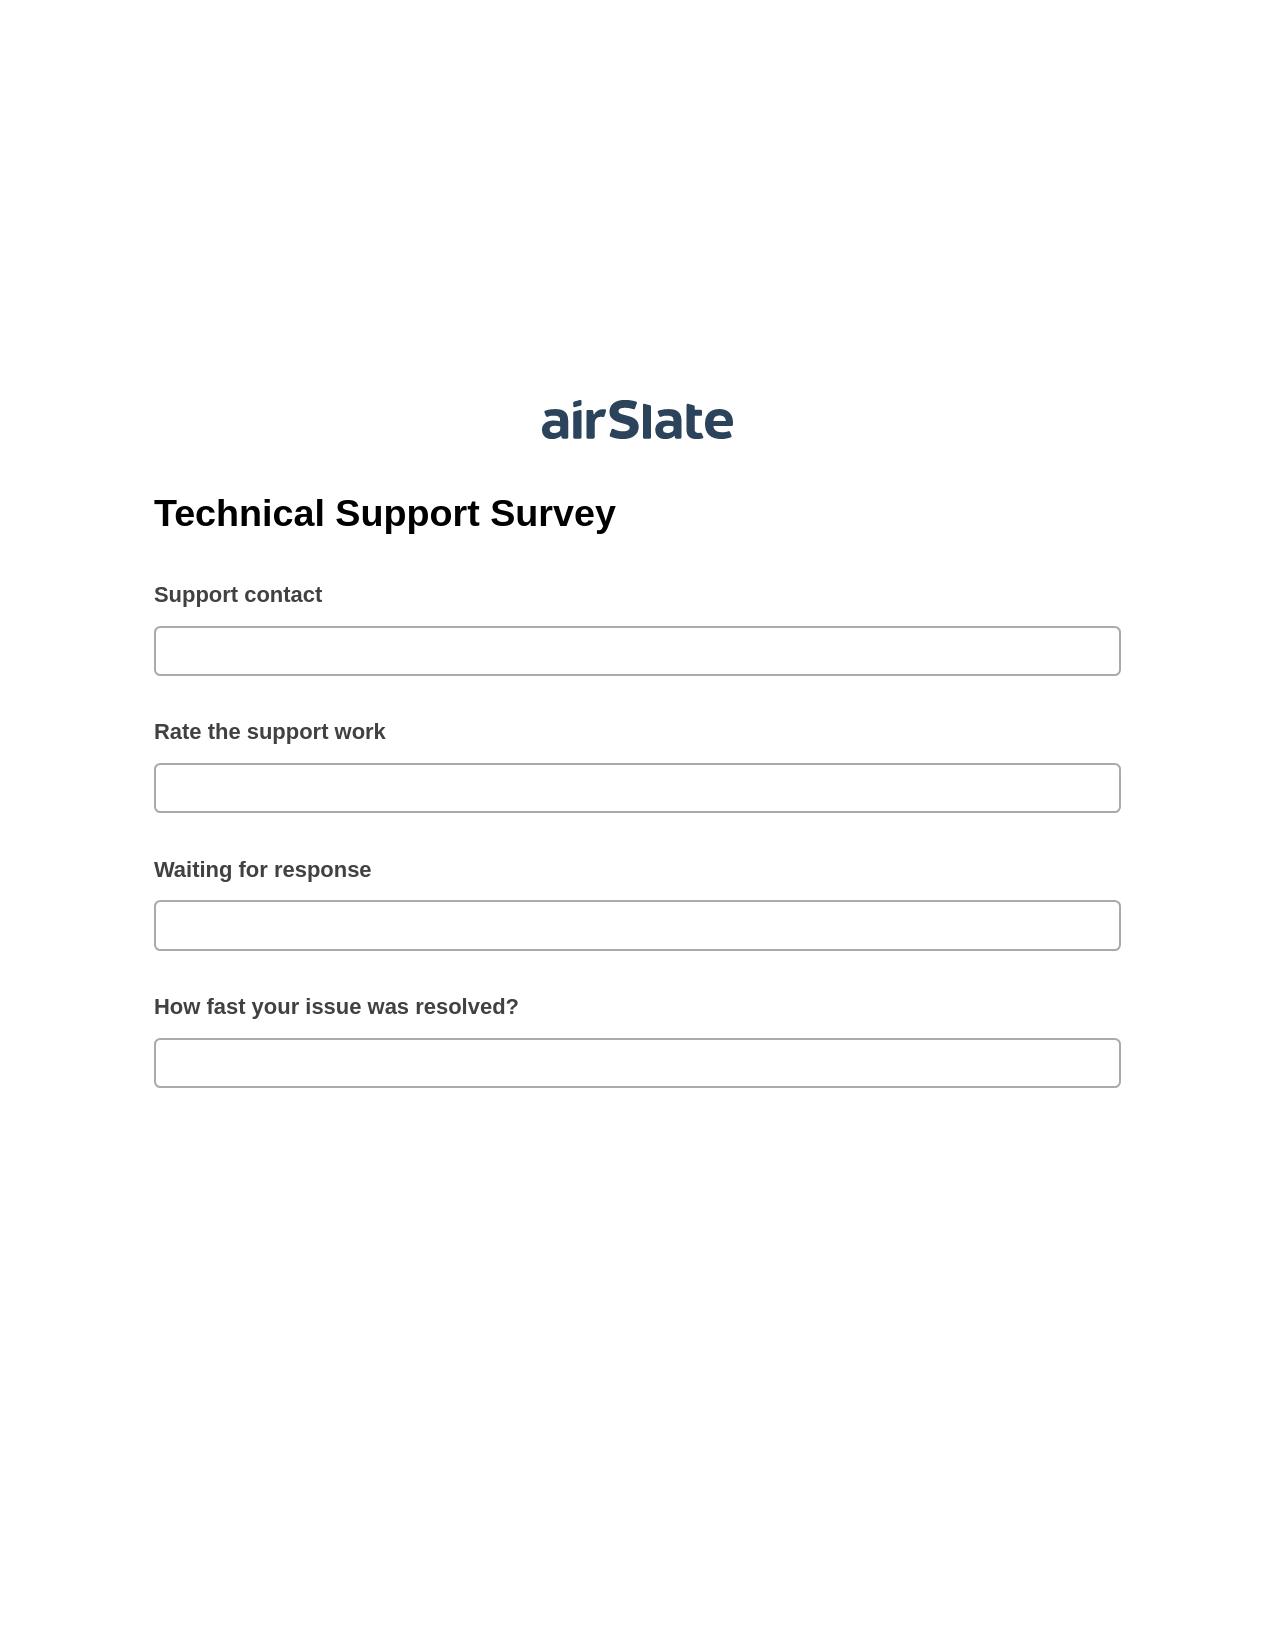 Technical Support Survey Pre-fill from Excel Spreadsheet Bot, Remove Slate Bot, Archive to Google Drive Bot